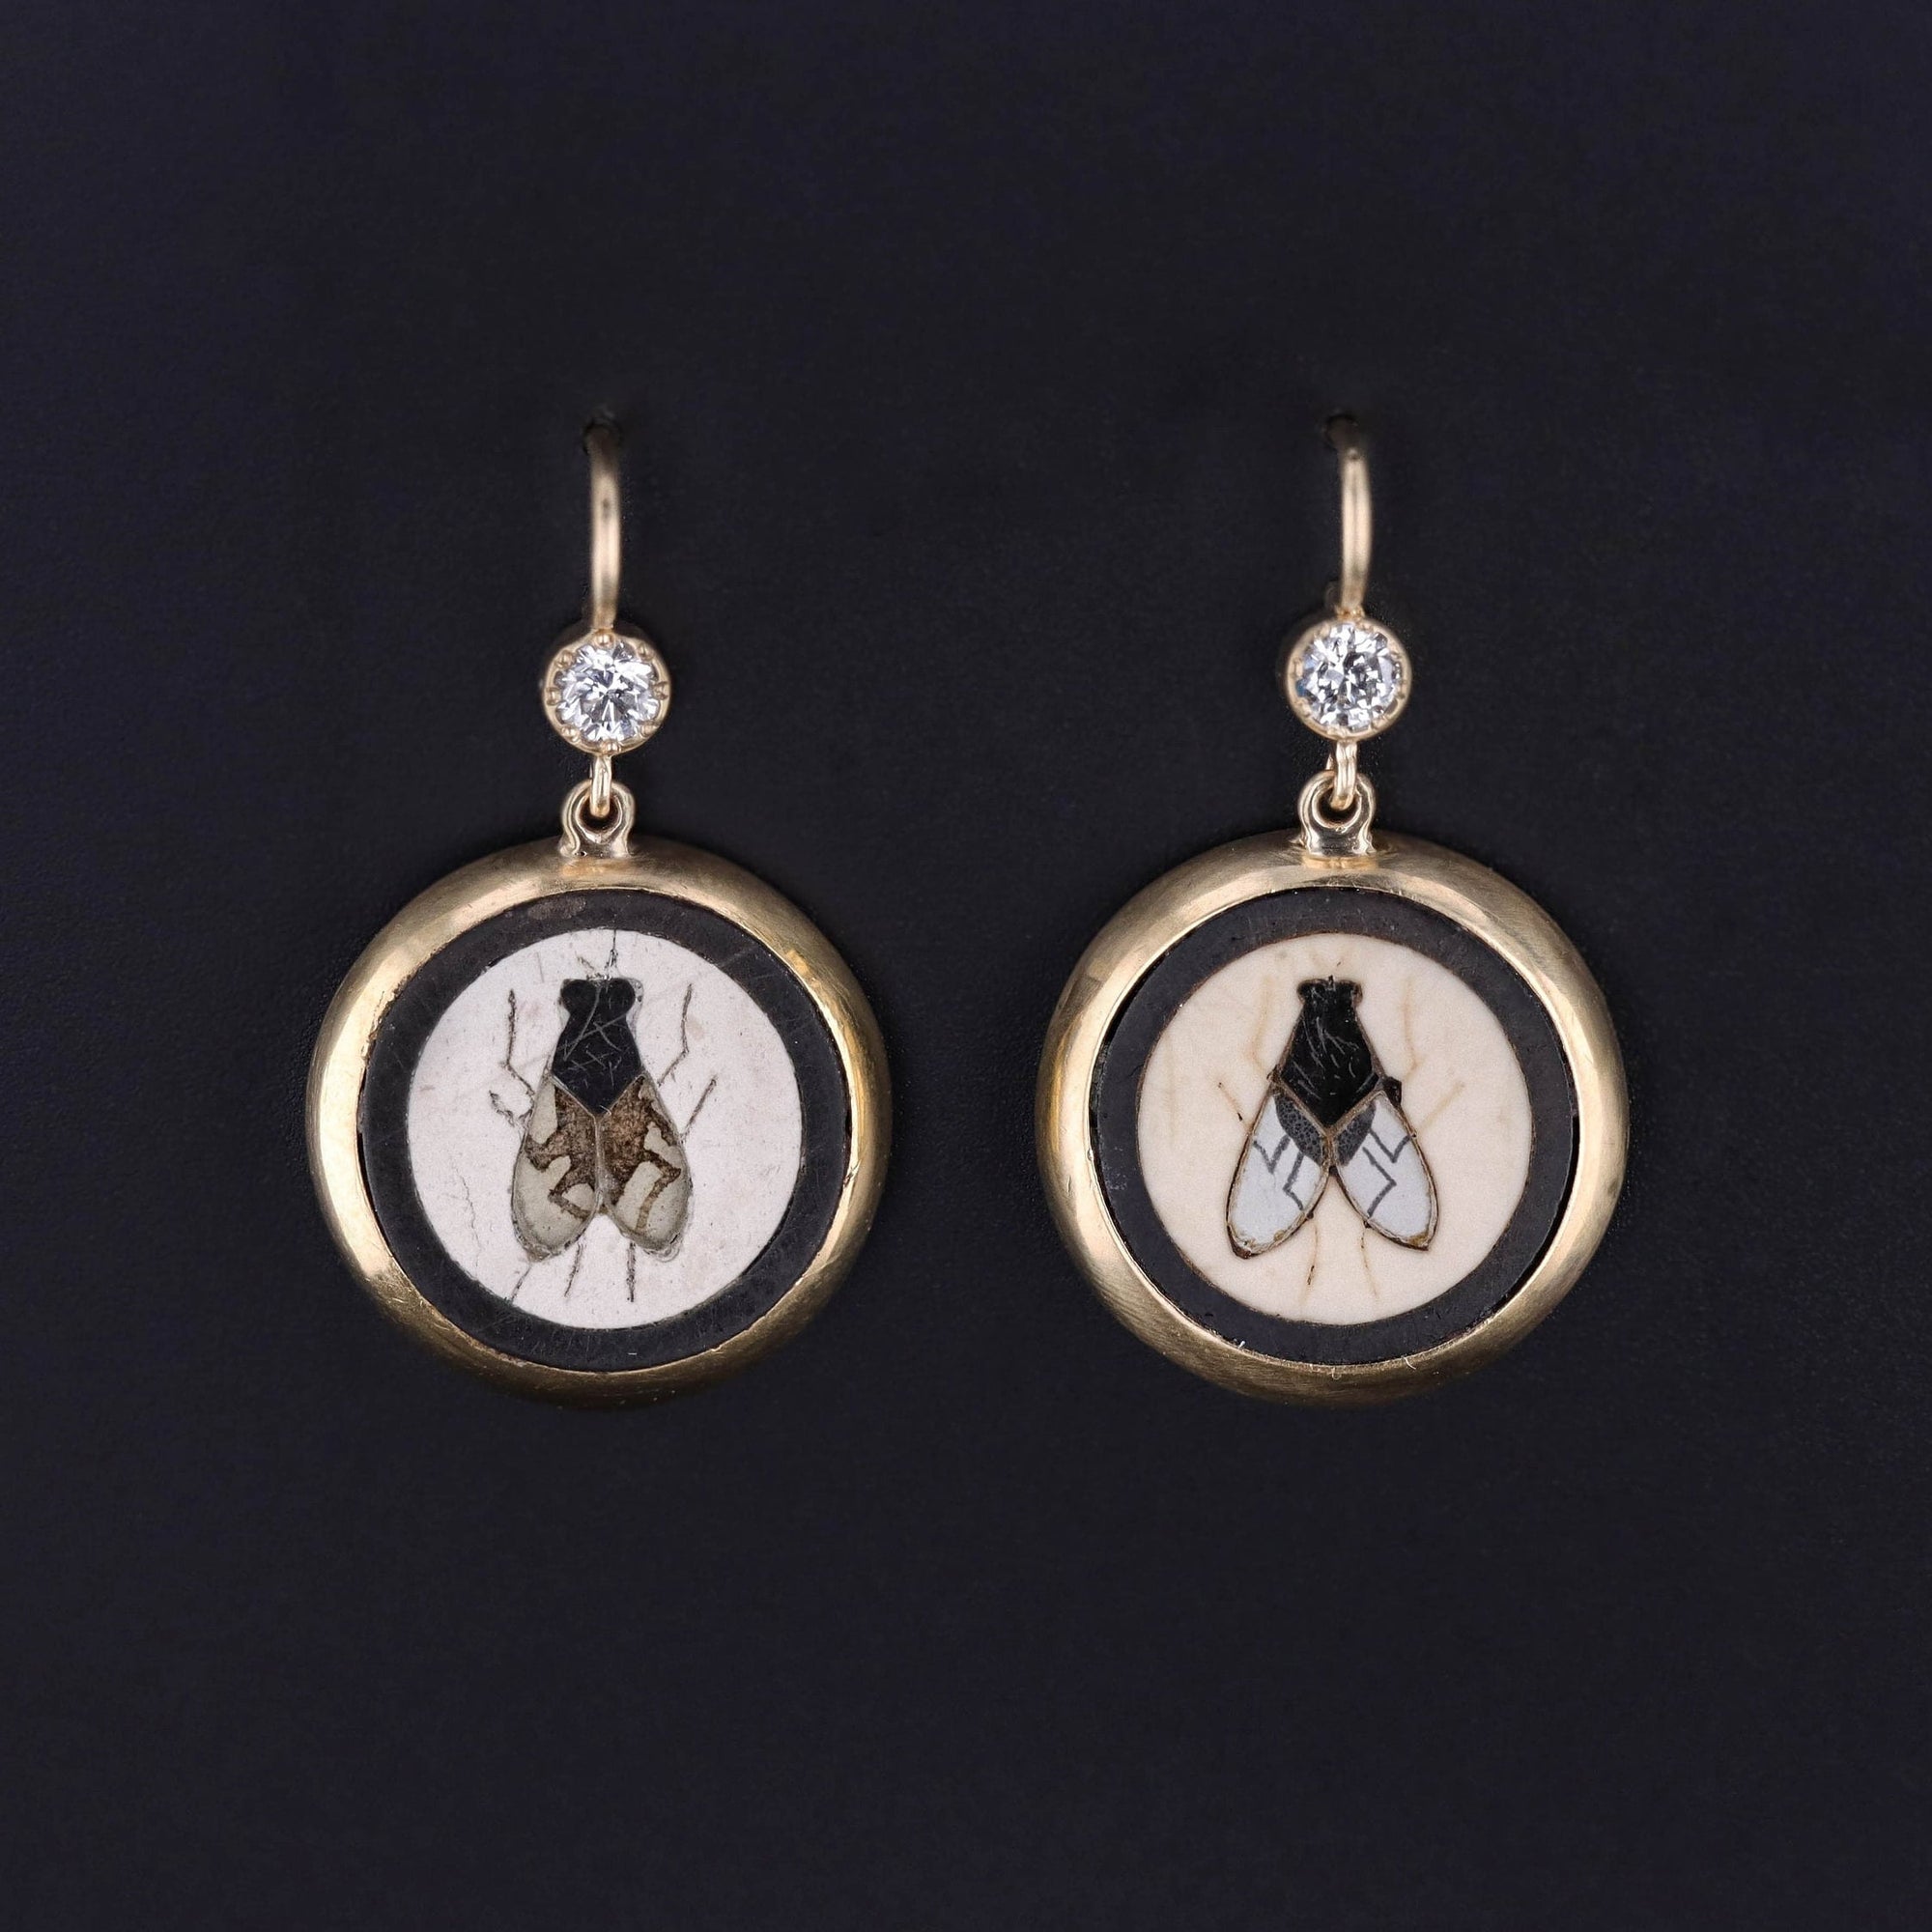 Antique Pietra Dura Fly Earrings of 14k Gold